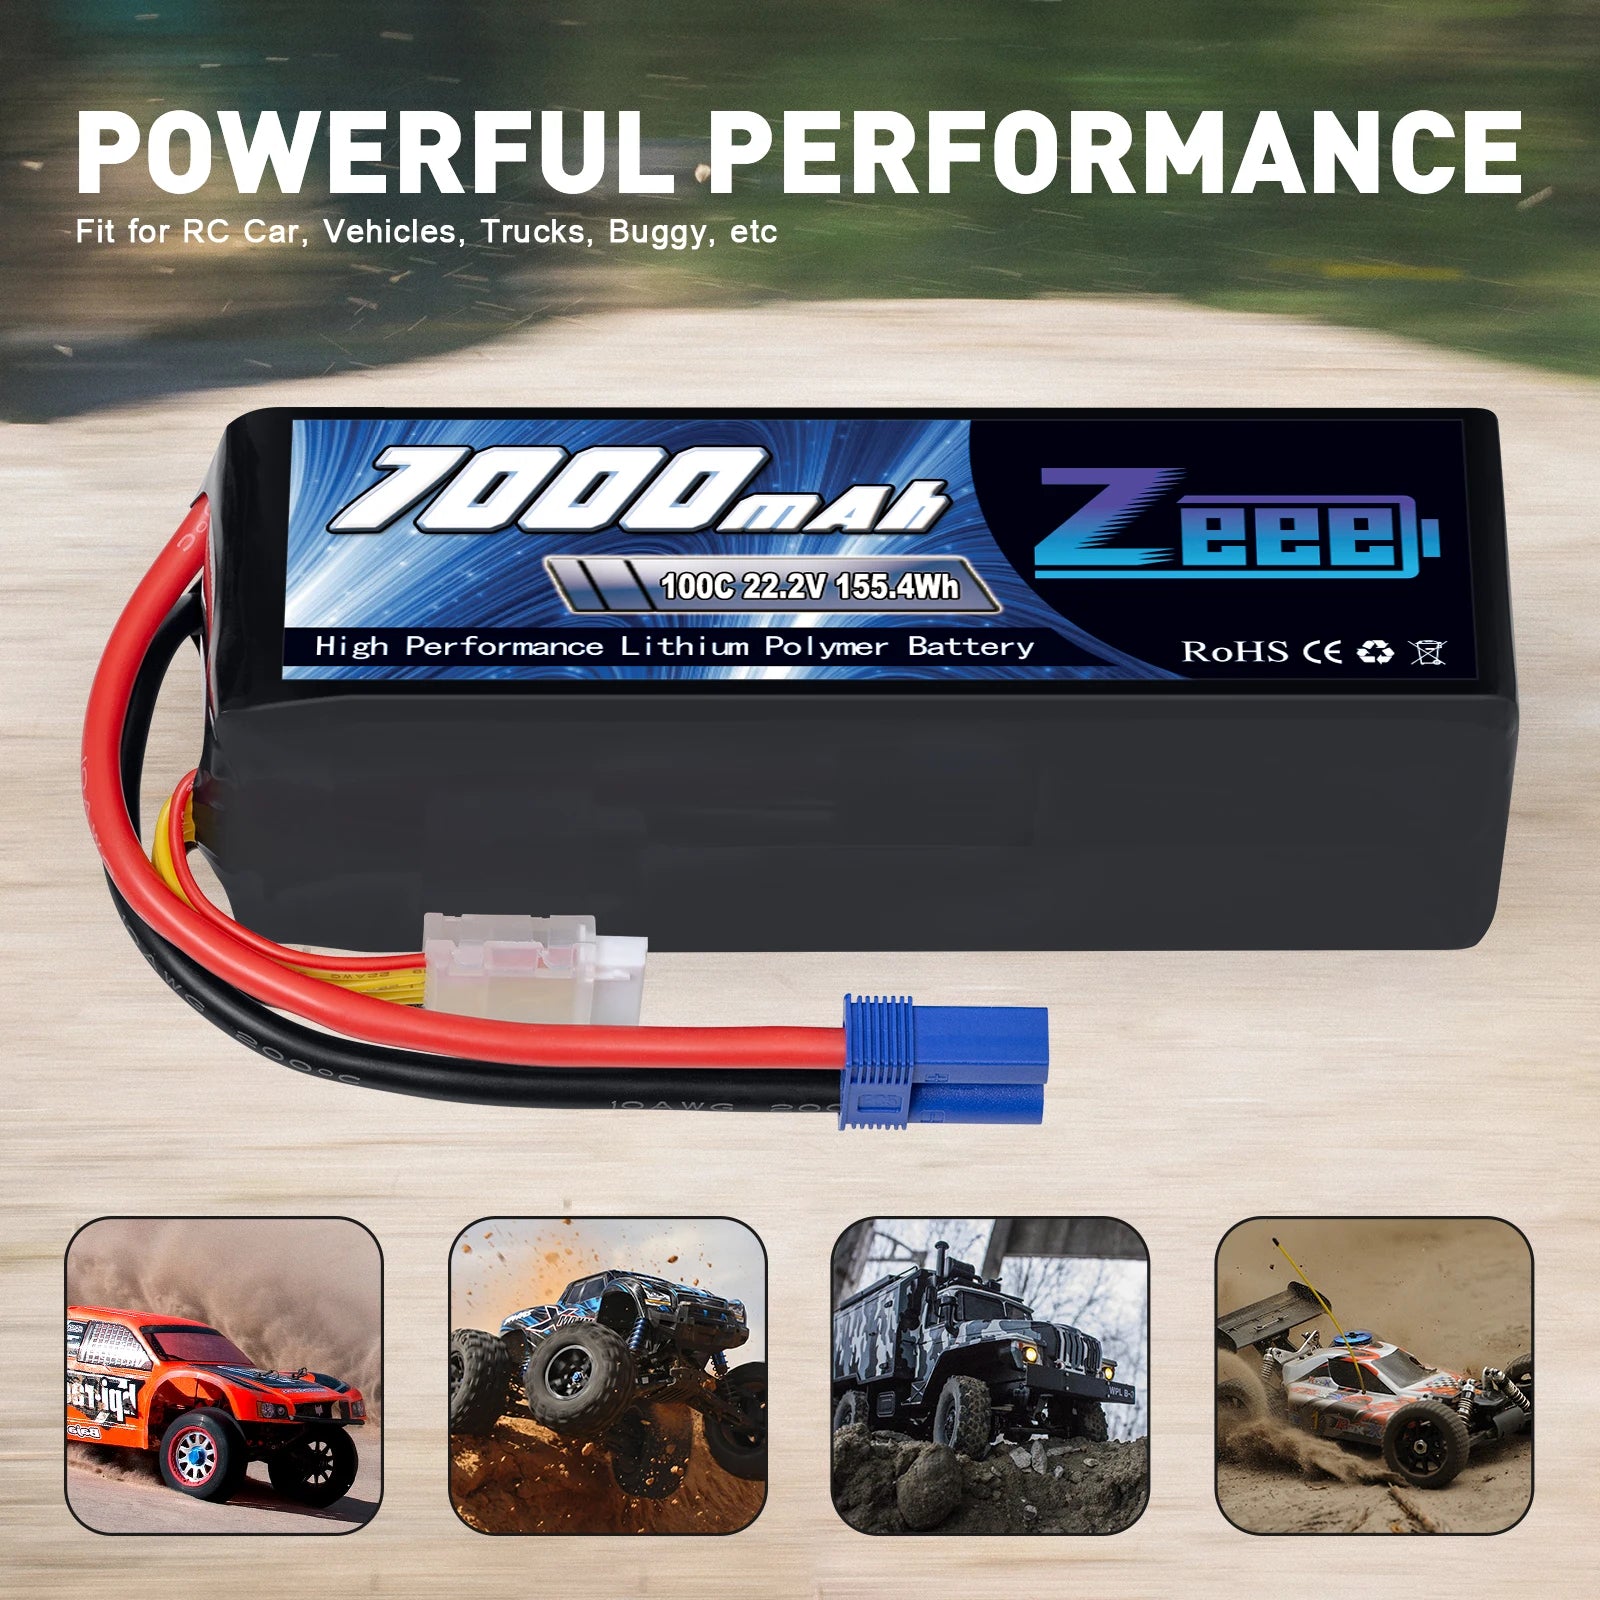 2Units Zeee Lipo Battery, POWERFUL PERFORMANCE Fit for RC Car, Vehicles, Trucks